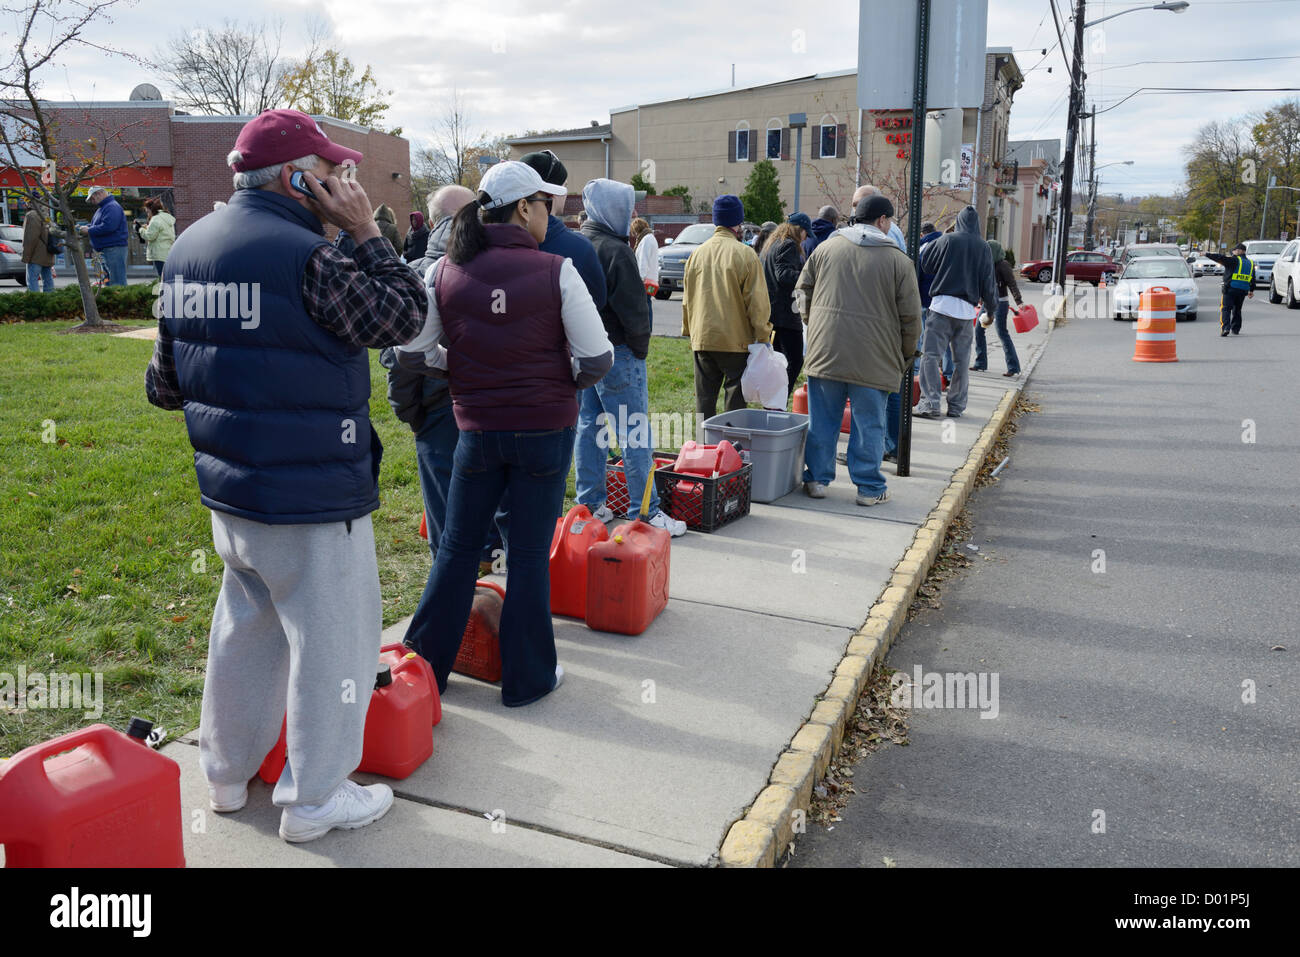 Line at gas station after Hurricane Sandy, northern NJ.  People with cans waiting to get gas for cars and generators. Stock Photo